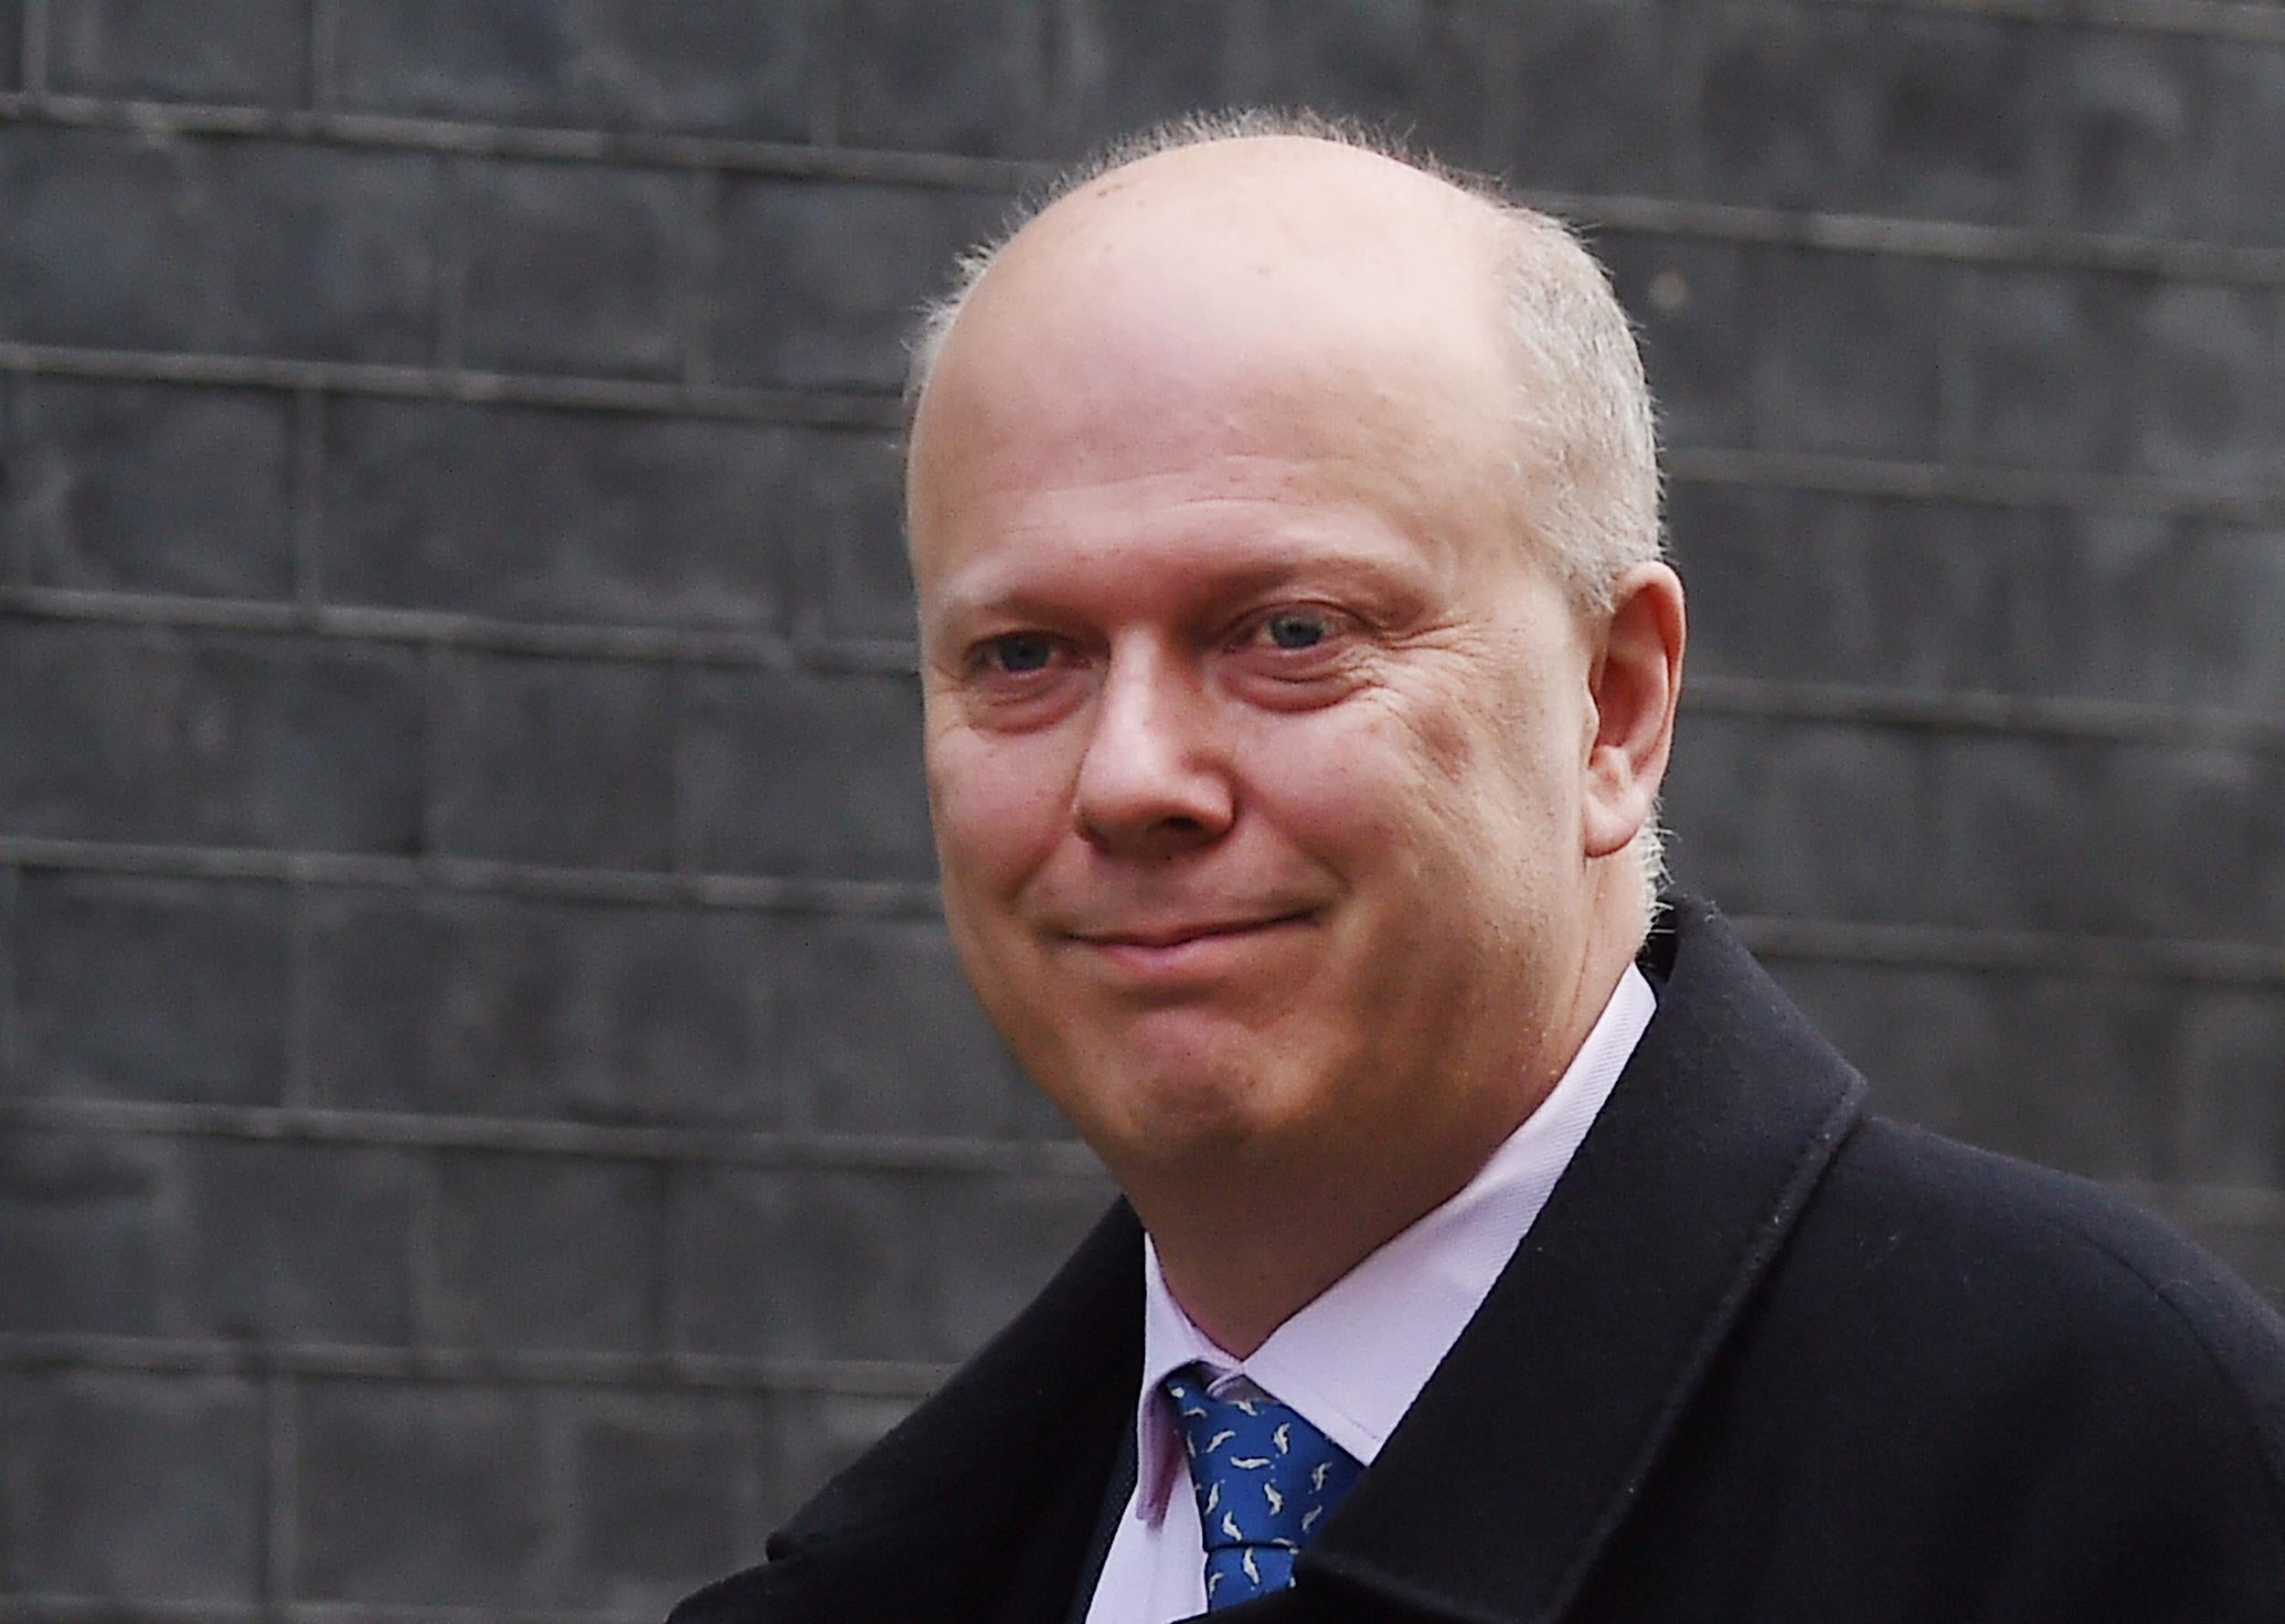 Many of the problems identified in the report date back to the tenure of Chris Grayling as Justice Secretary